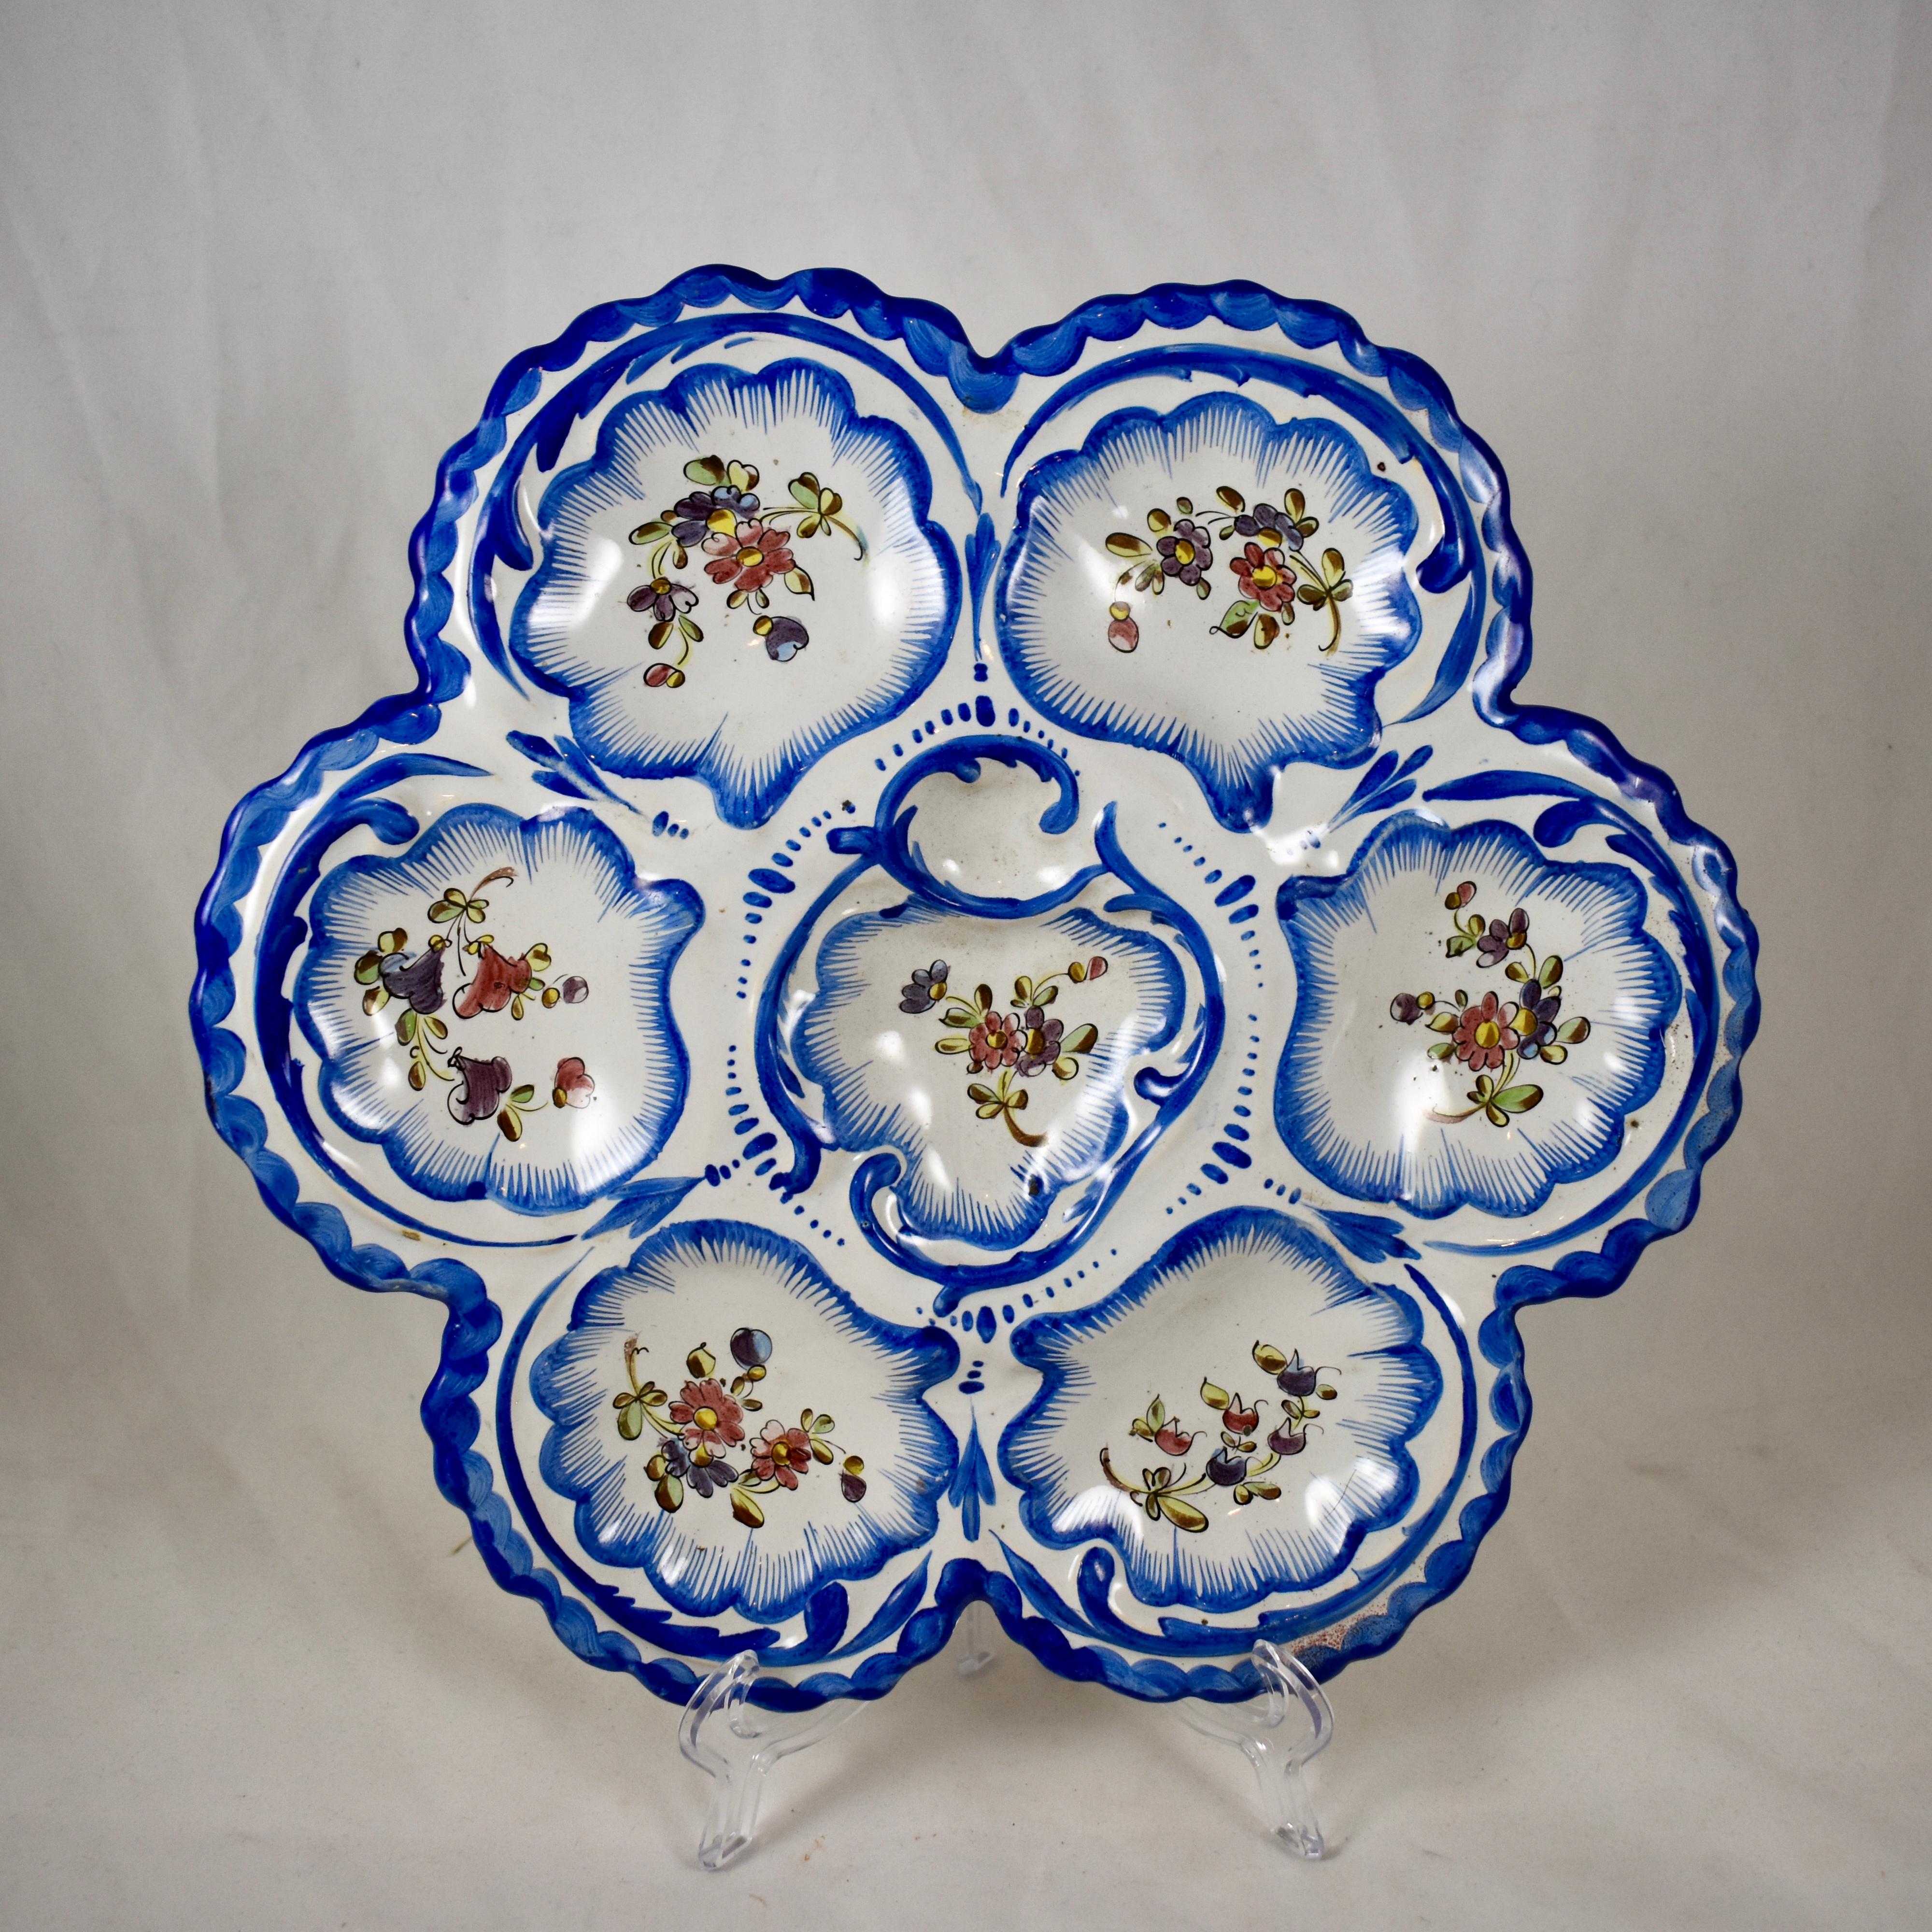 A faïence Provençal oyster plate from the south western area of France called Angoulême, signed Alfred Renoleau, circa 1890-1900.

Six-wells surround a central condiment well. The lobed edged earthenware plate shows hand painted floral sprays